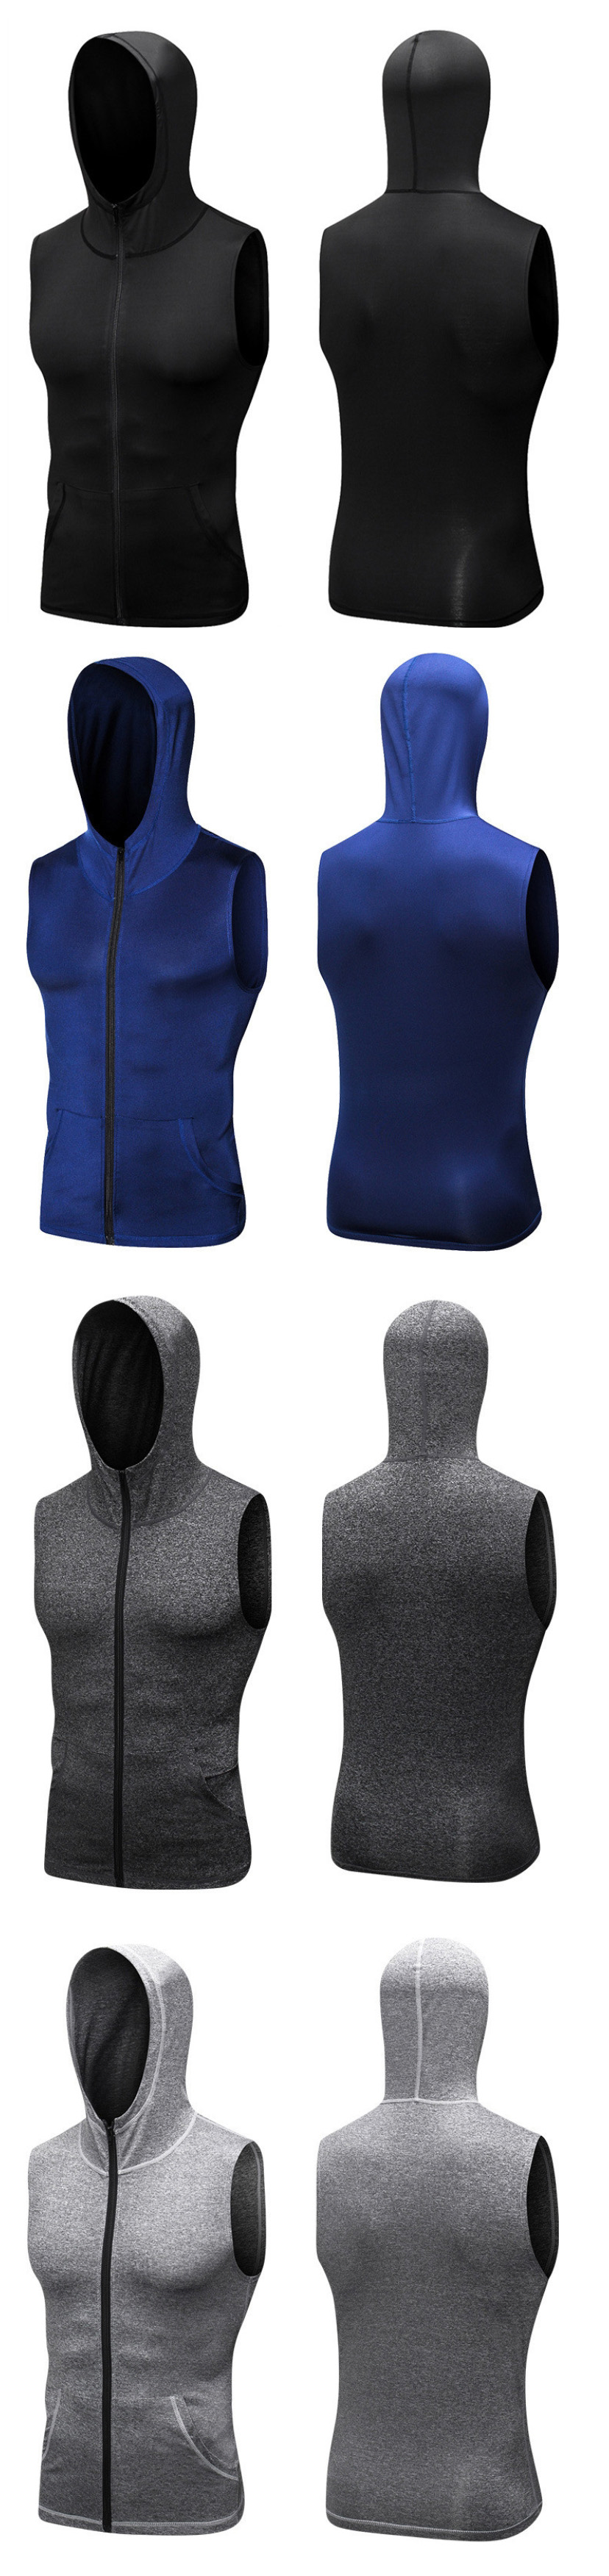 YUERLIAN-Mens-Hooded-Sleeveless-Running-Jackets-Boy-Sports-Vest-With-Pocket-Zip-Fitness-Gym-Quick-Dr-1715541-2